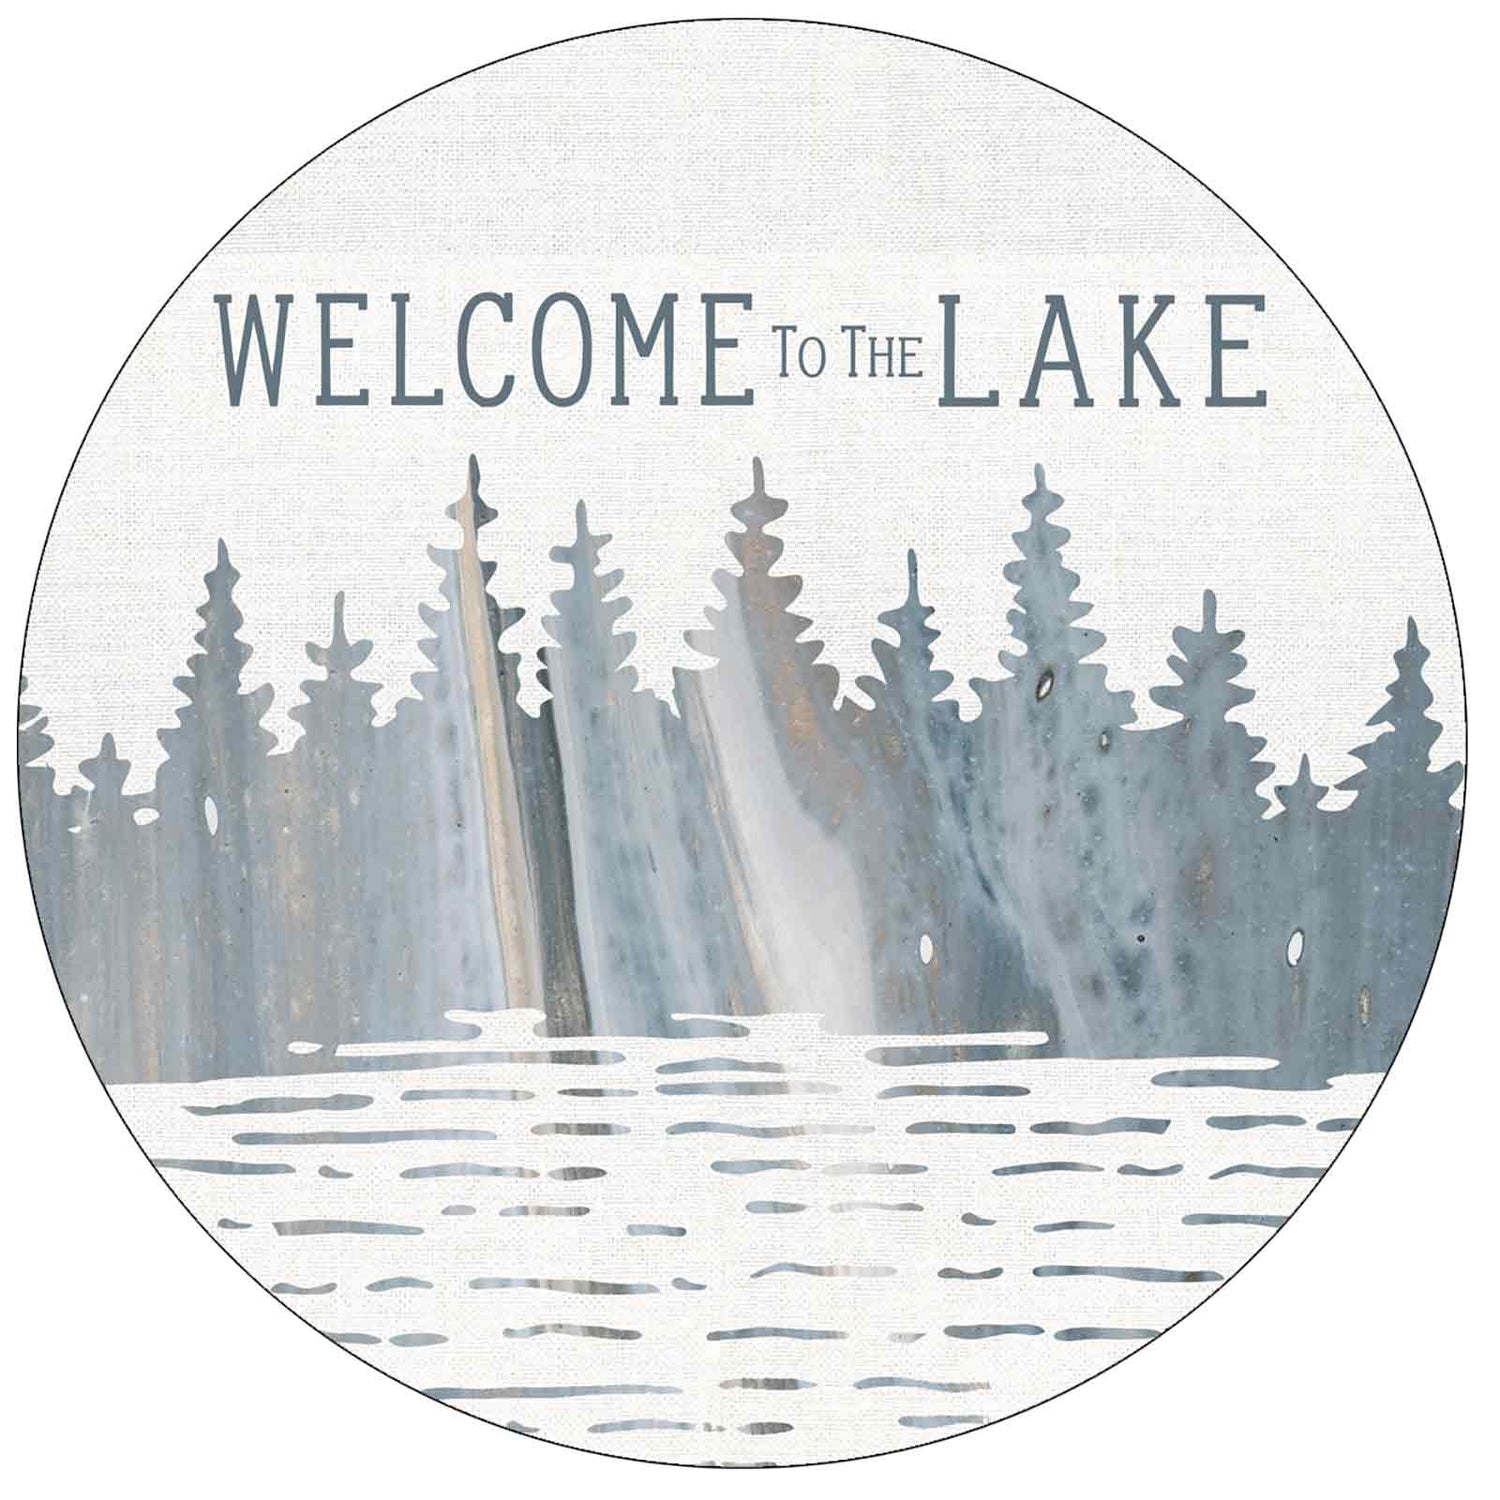 Welcome To The Lake Round Art Coaster - Set of 4 Coaster - rockflowerpaper